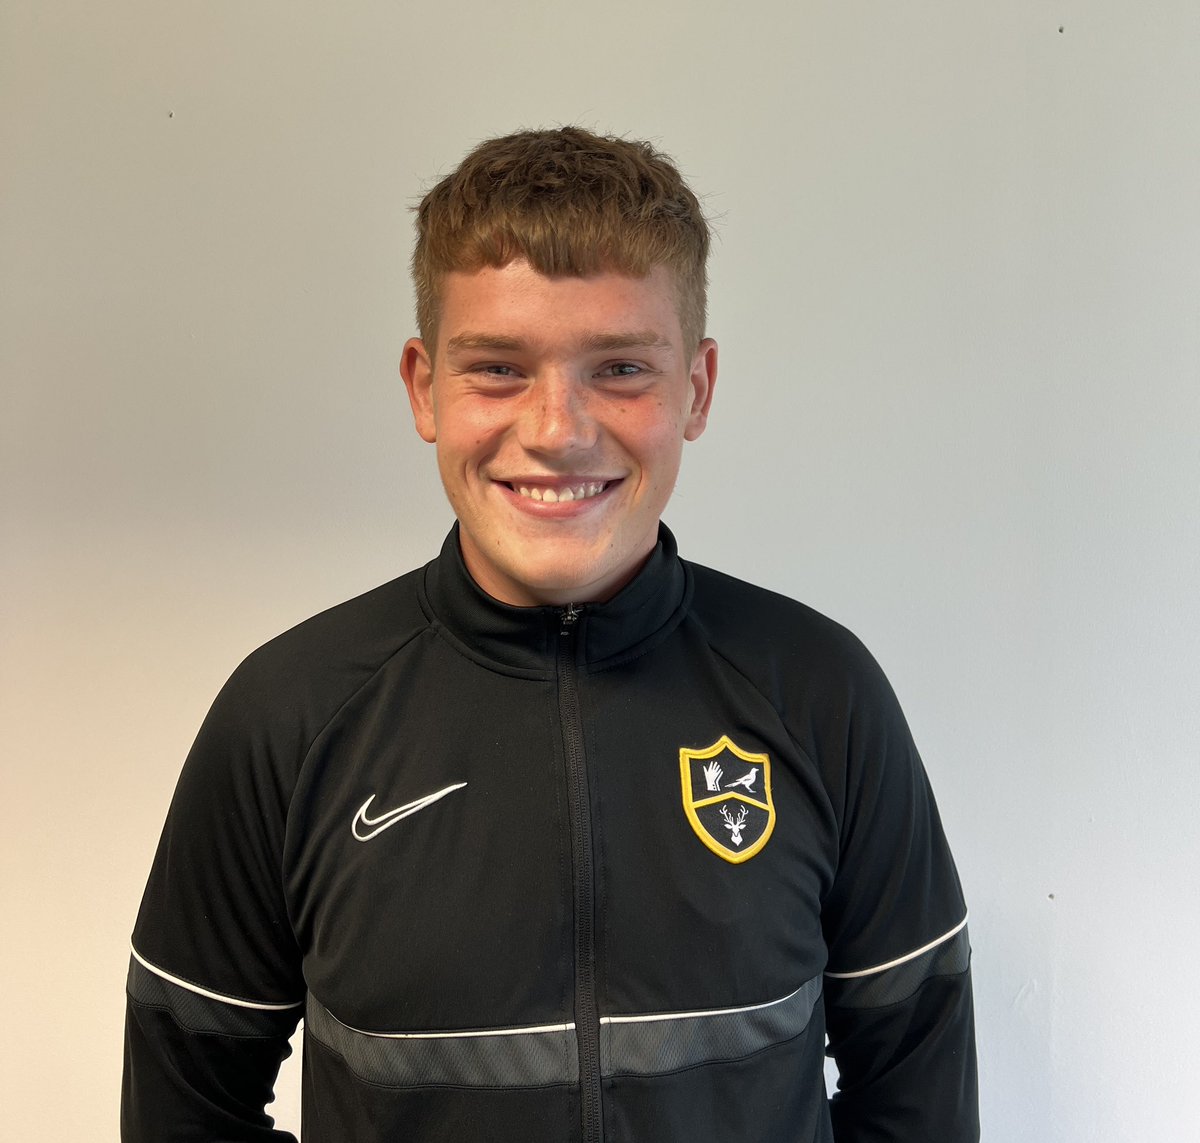 🧤 ⭐️ Well done to our U17 goalkeeper Kieran Harwood who has been selected for the @NFYLU19U23 All Star North Squad!

@PVSportAcademy @ParkViewCLS 

#NFYL